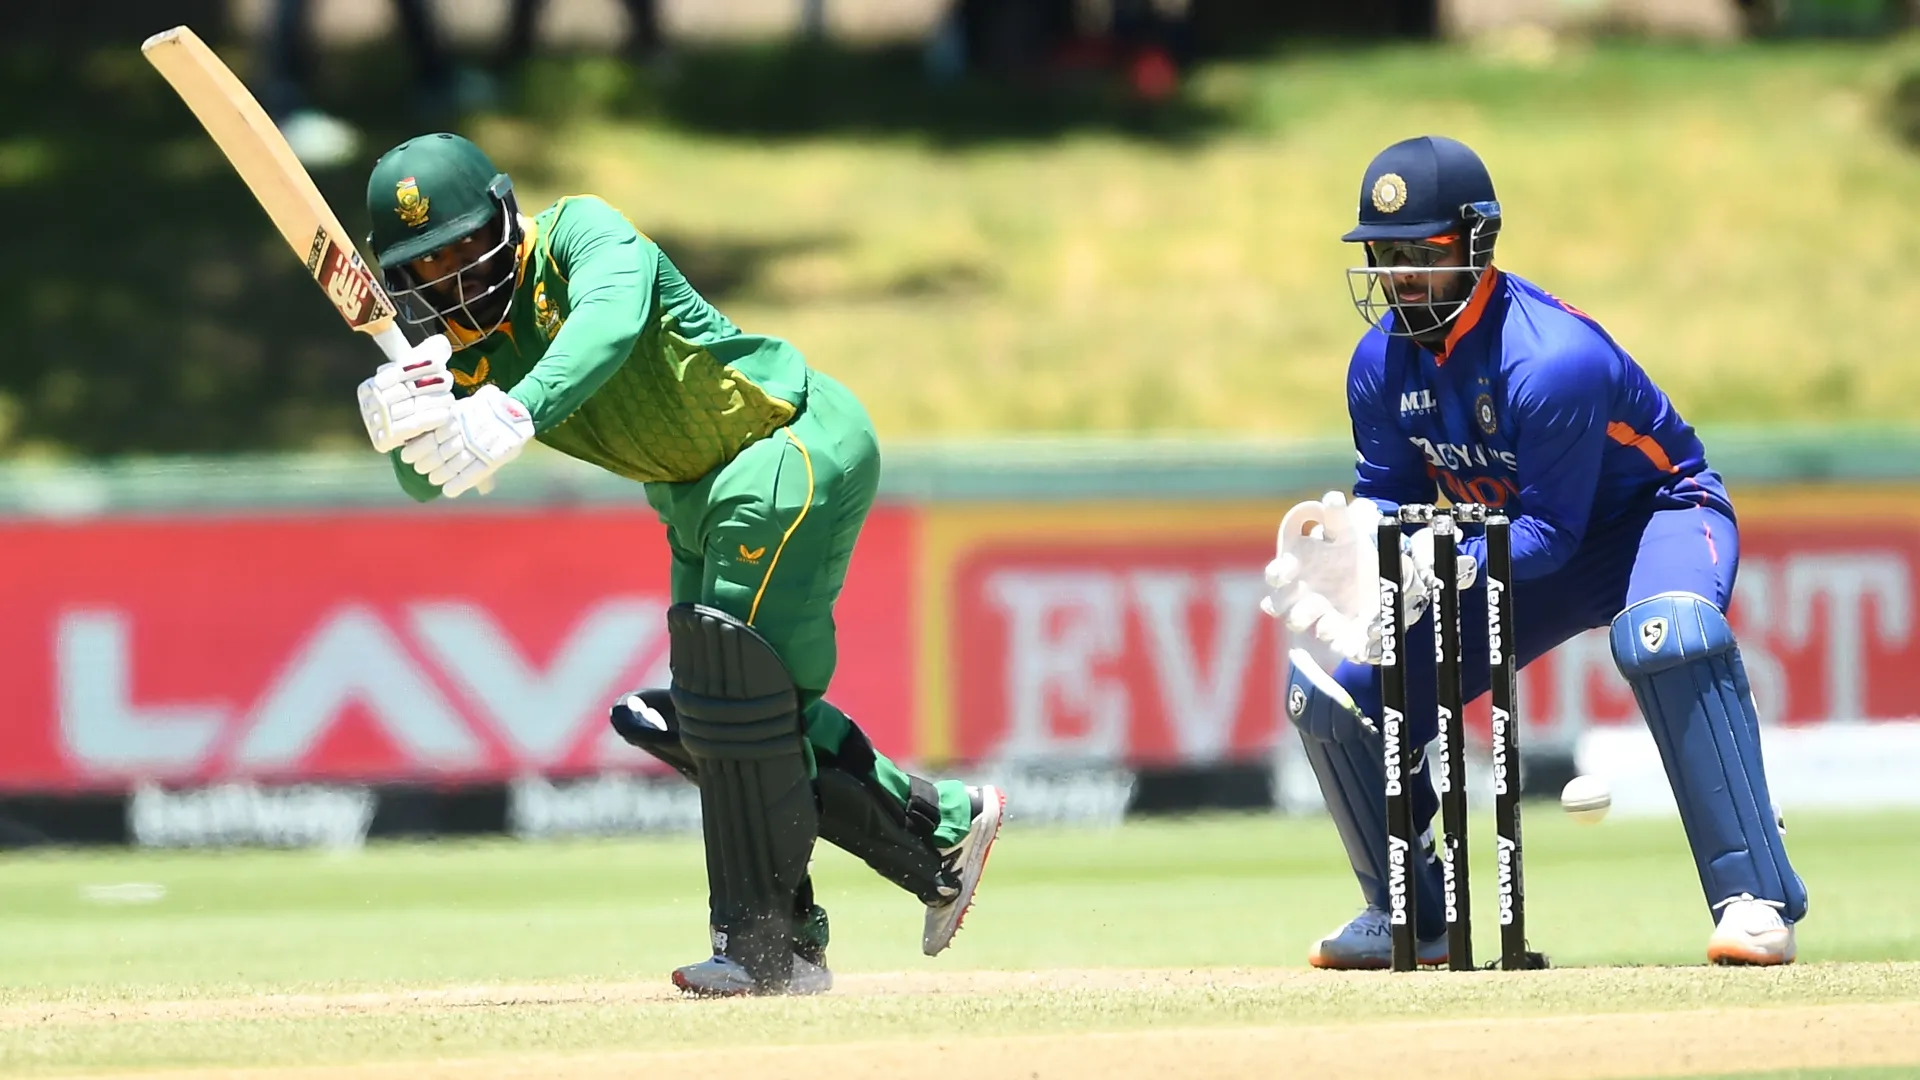 India vs South Africa T20I series: South Africa announced their T20I squad | SportzPoint.com